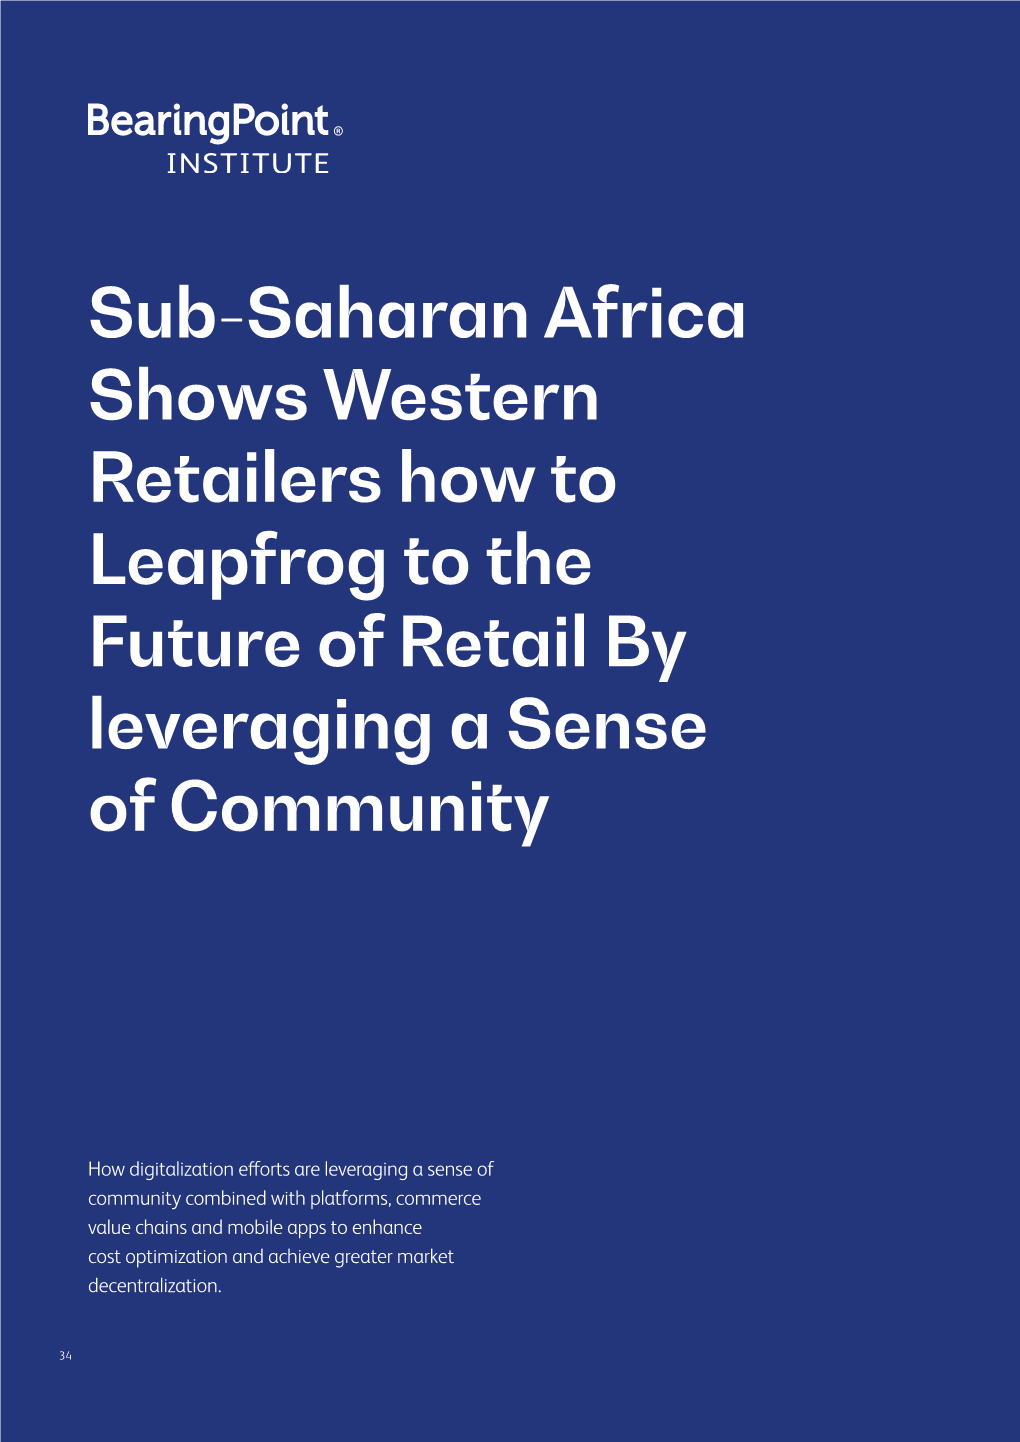 Sub-Saharan Africa Shows Western Retailers How to Leapfrog to The